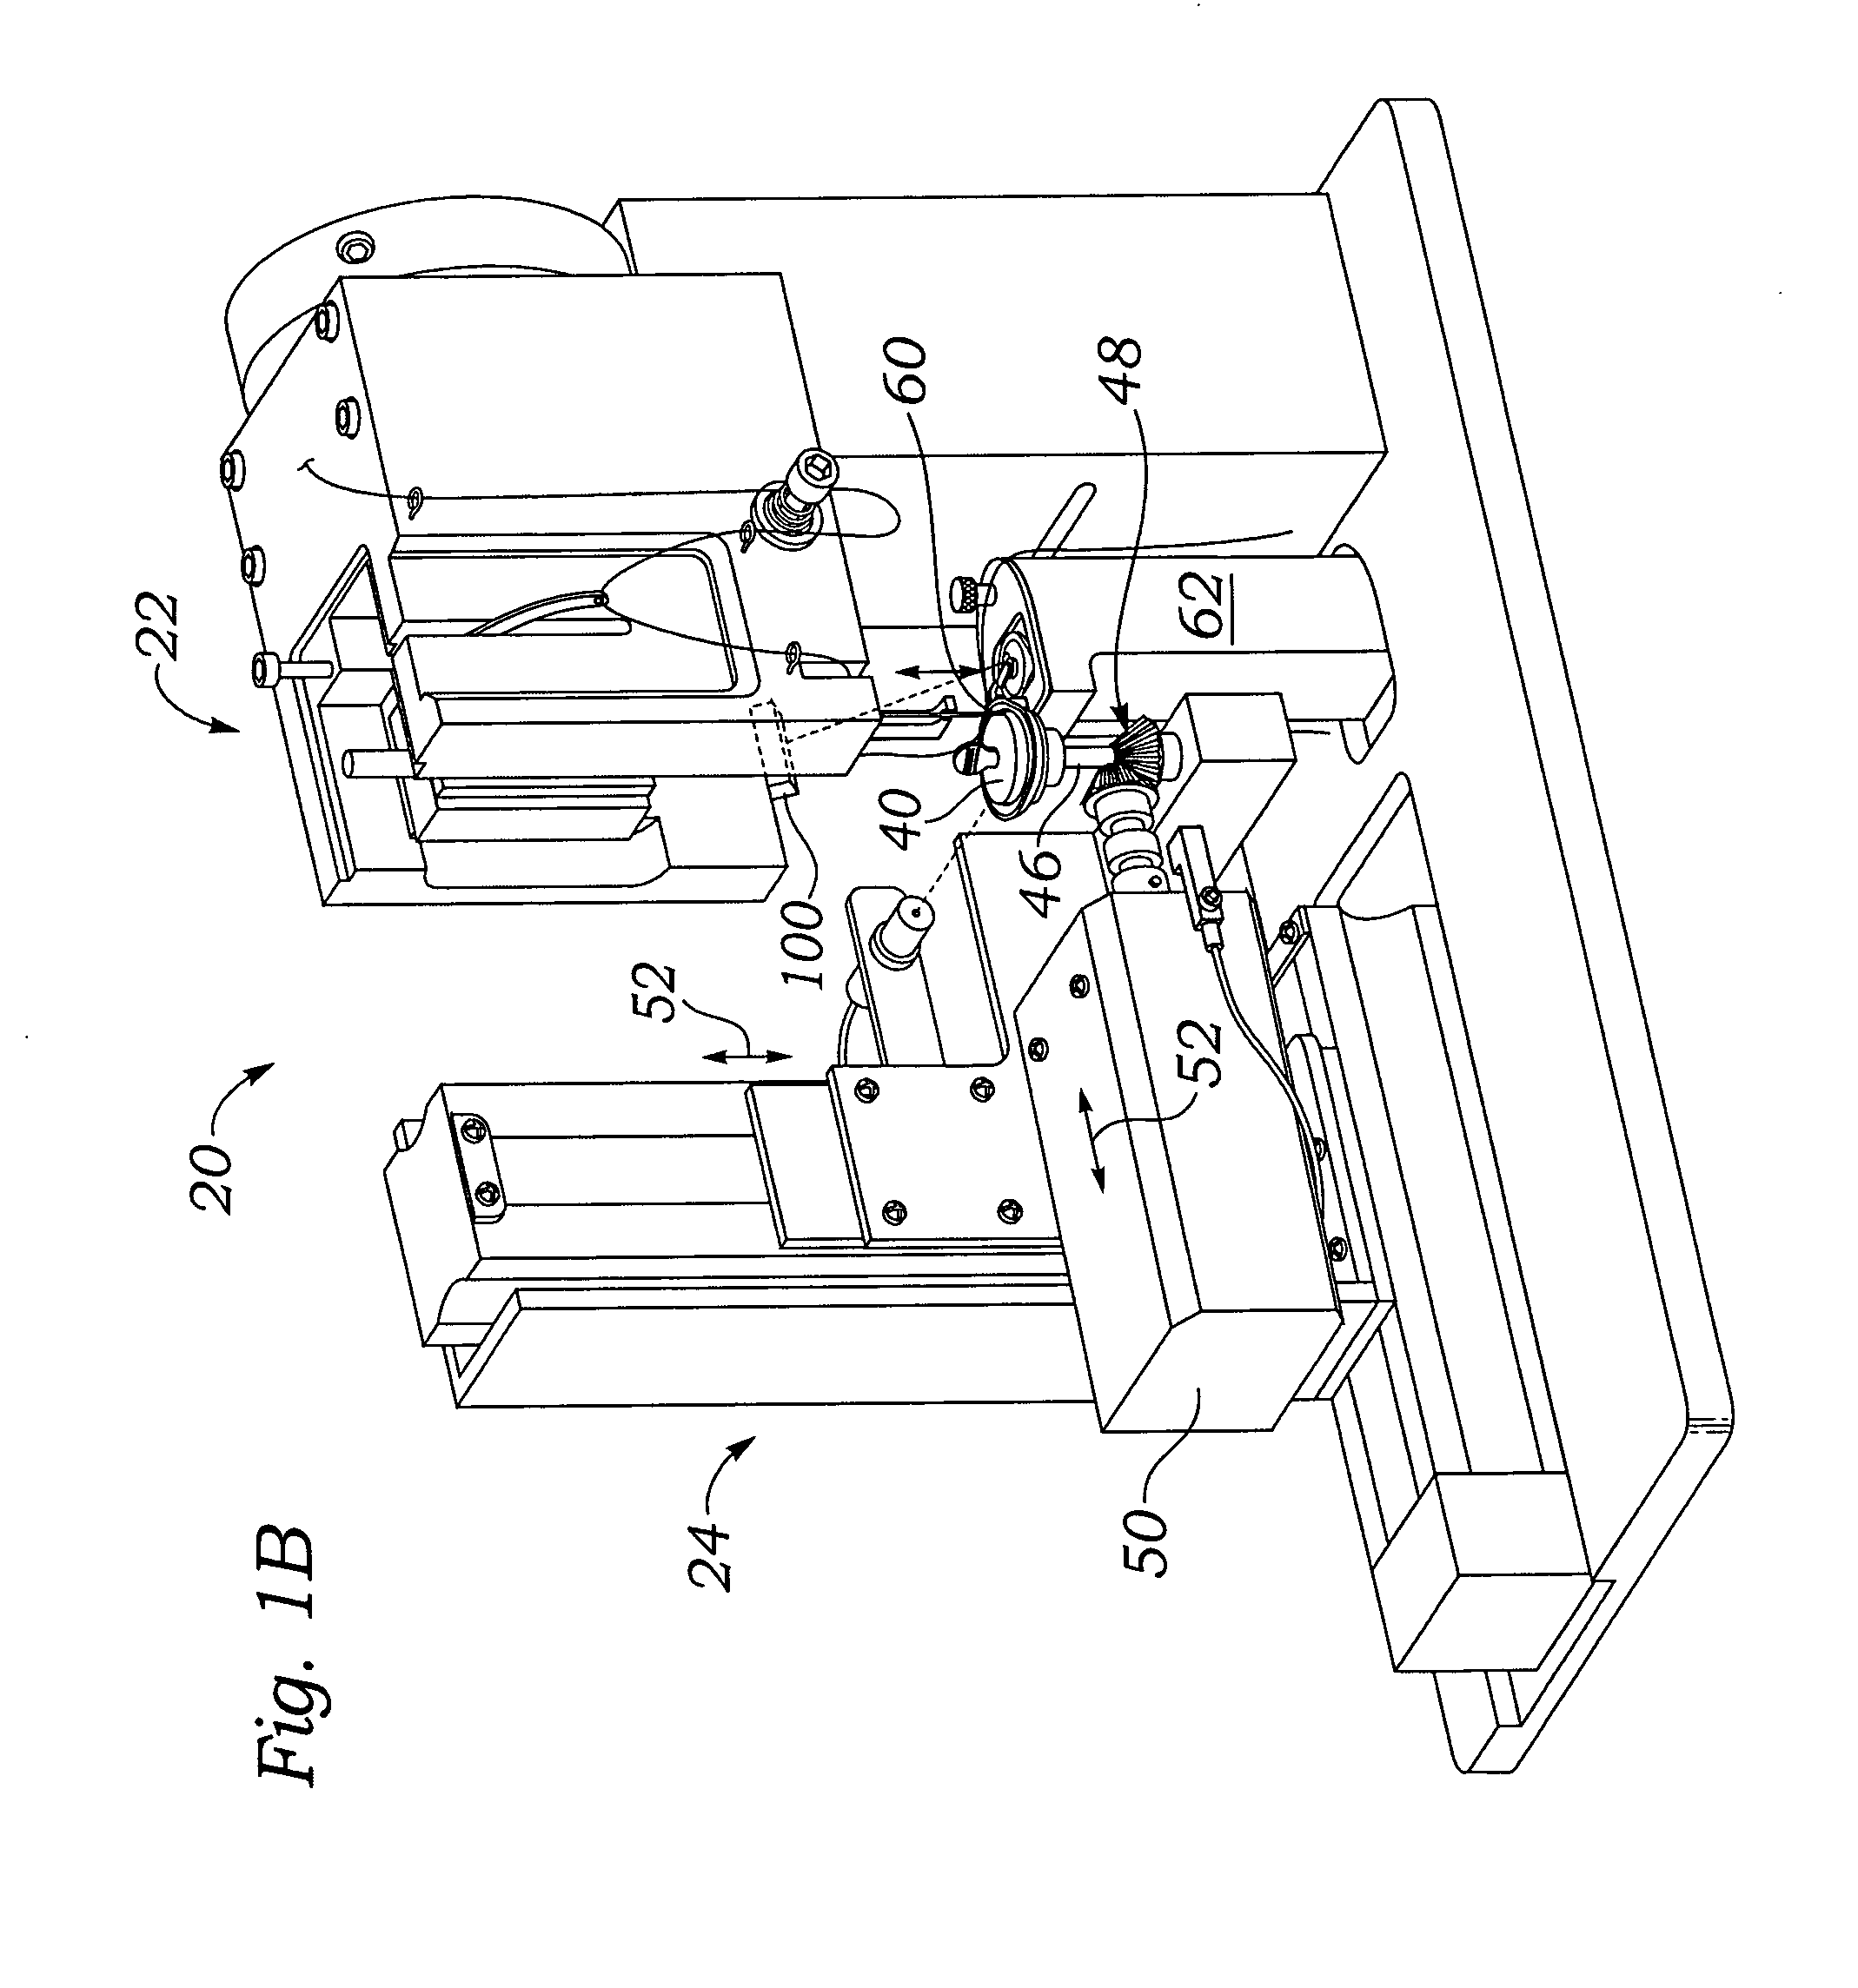 Automated surgical implant sewing system and method